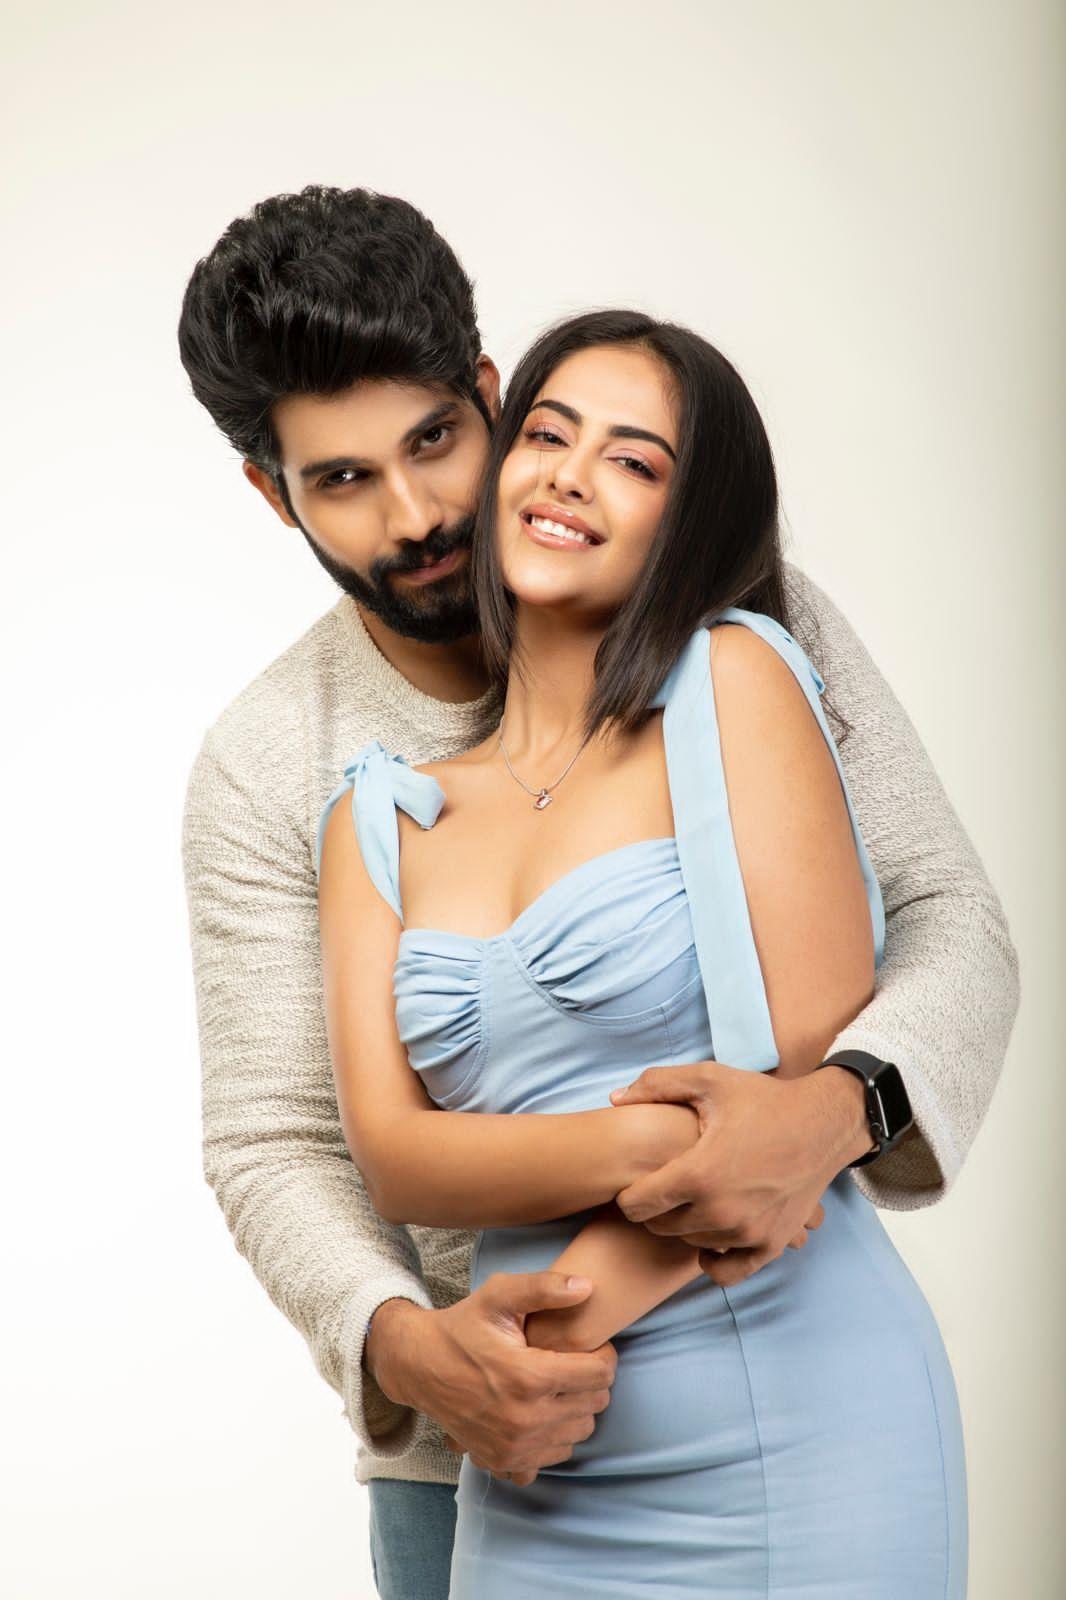 Avika Gor opens up on chemistry with co-actor Sai Ronak : The Tribune India